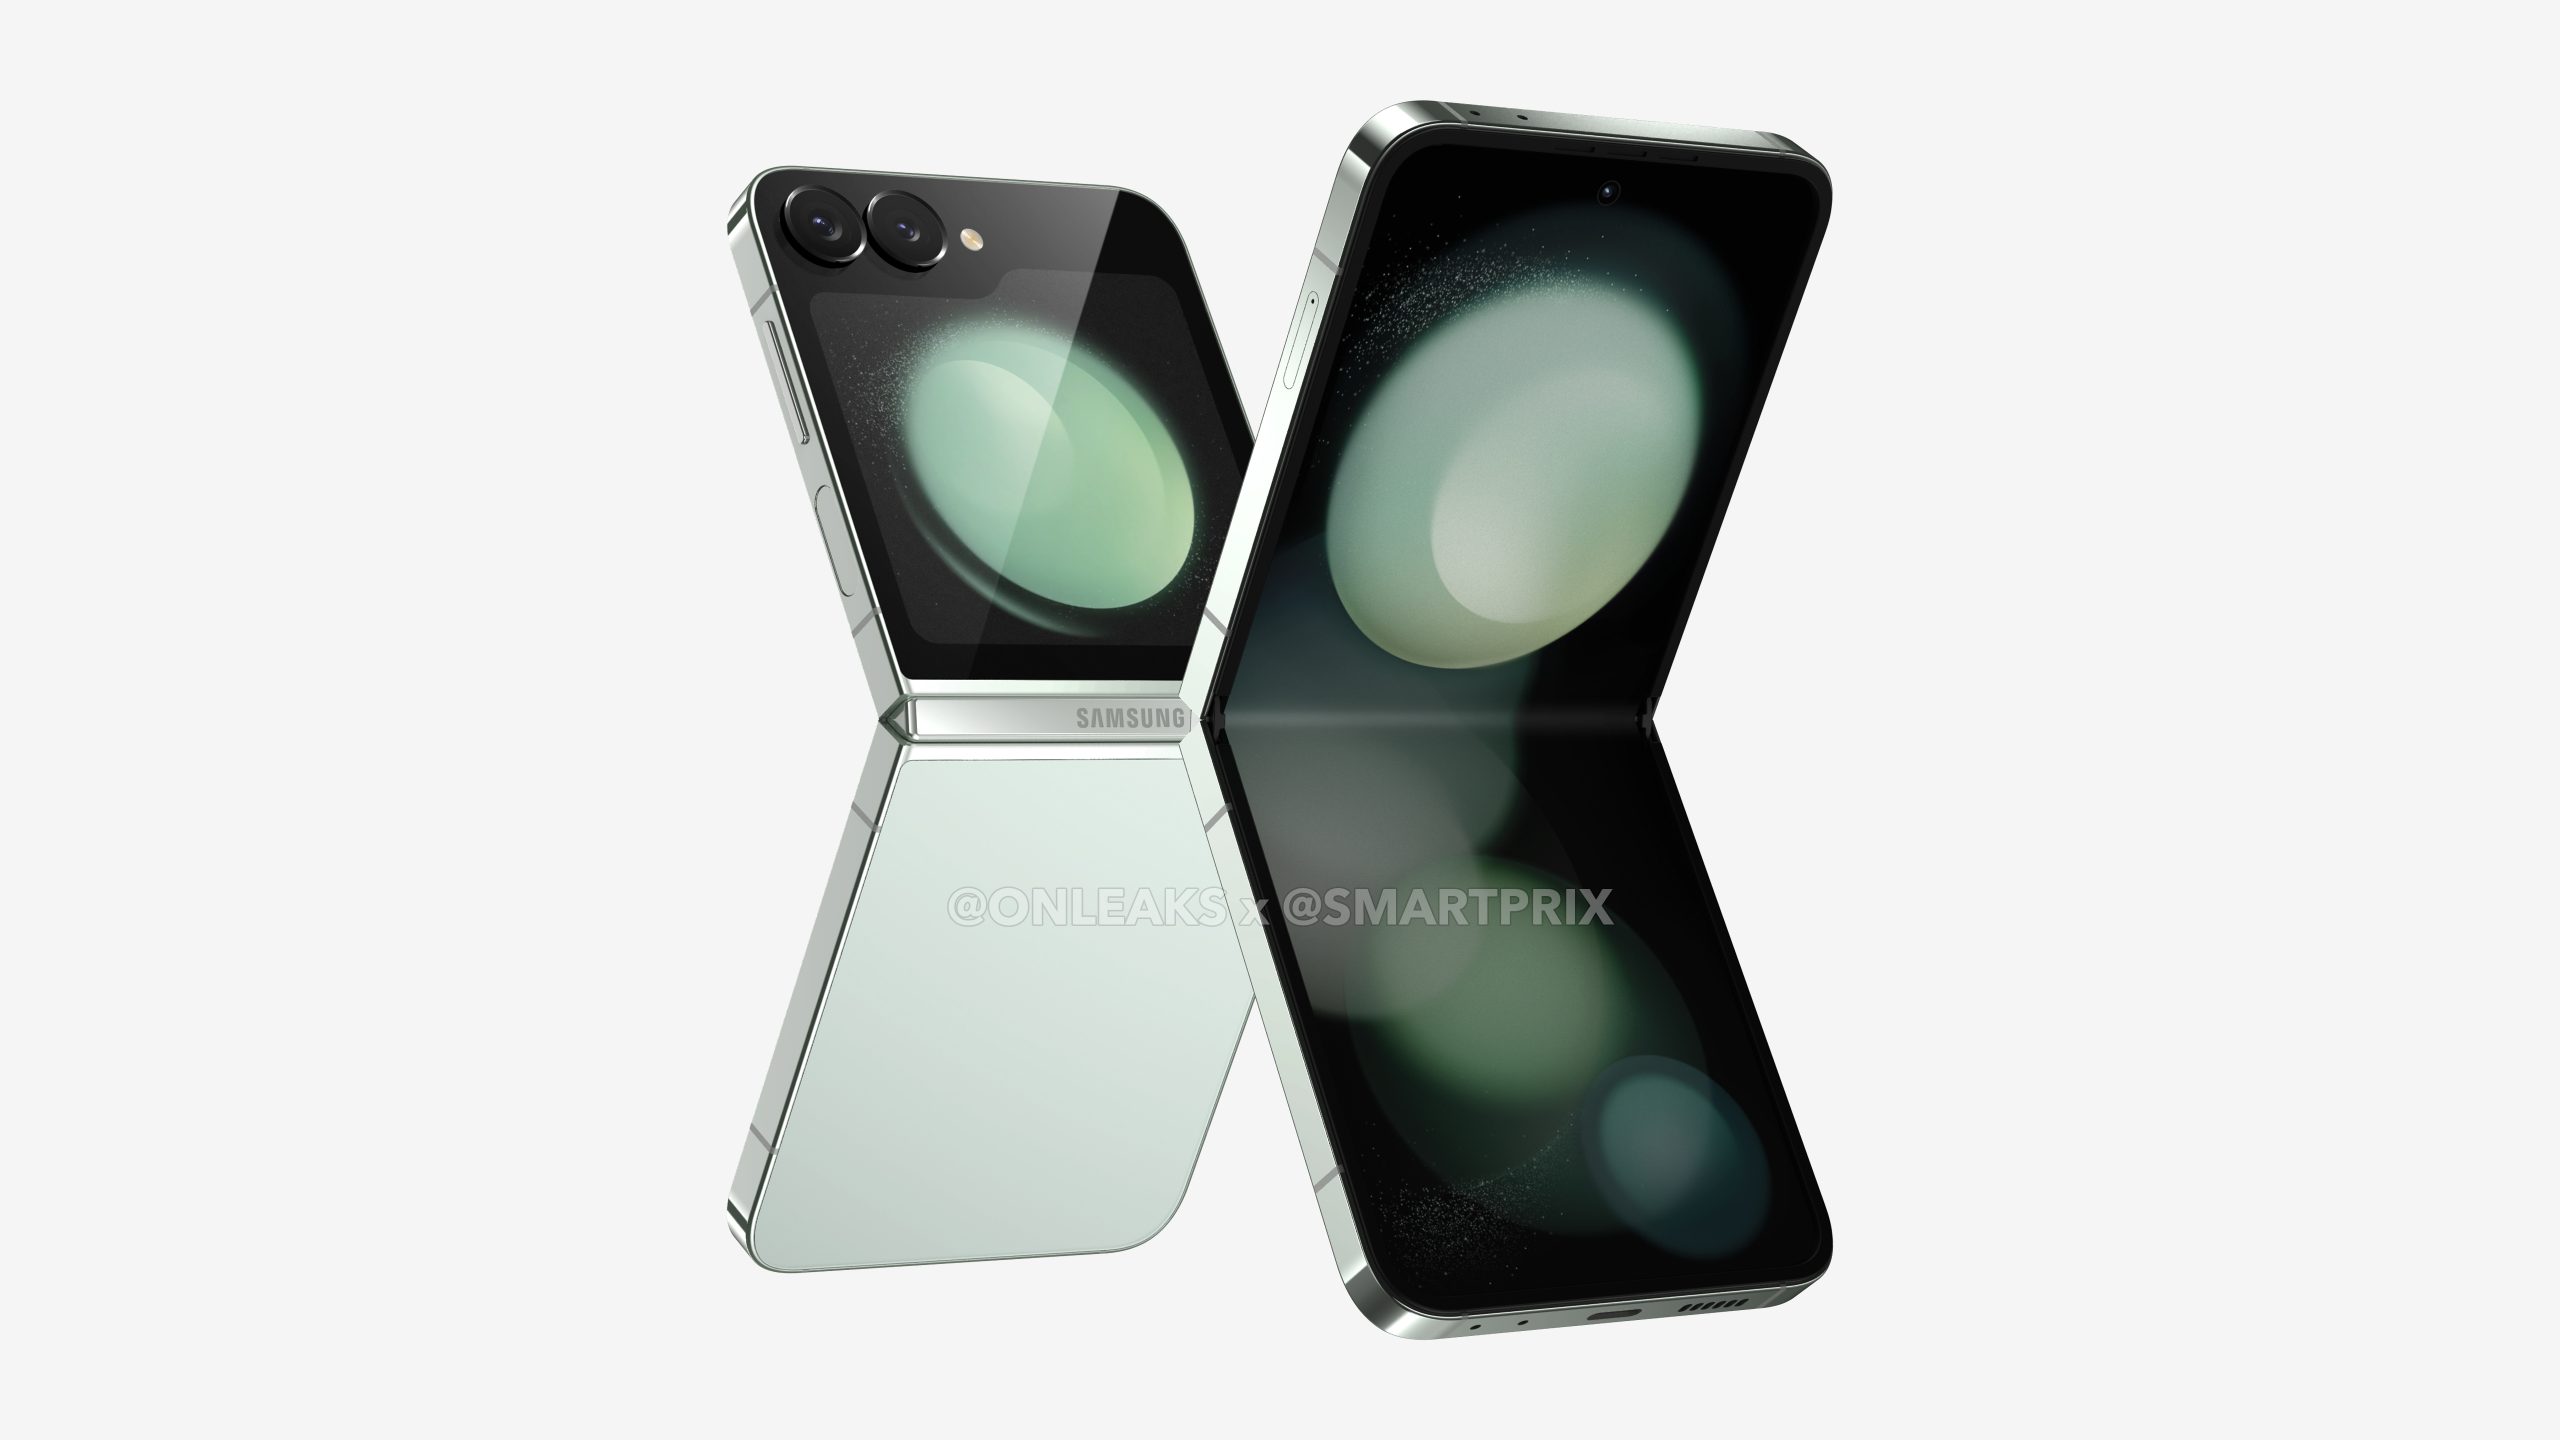 Following the Galaxy Fold 6: An insider has published quality images of the Galaxy Flip 6